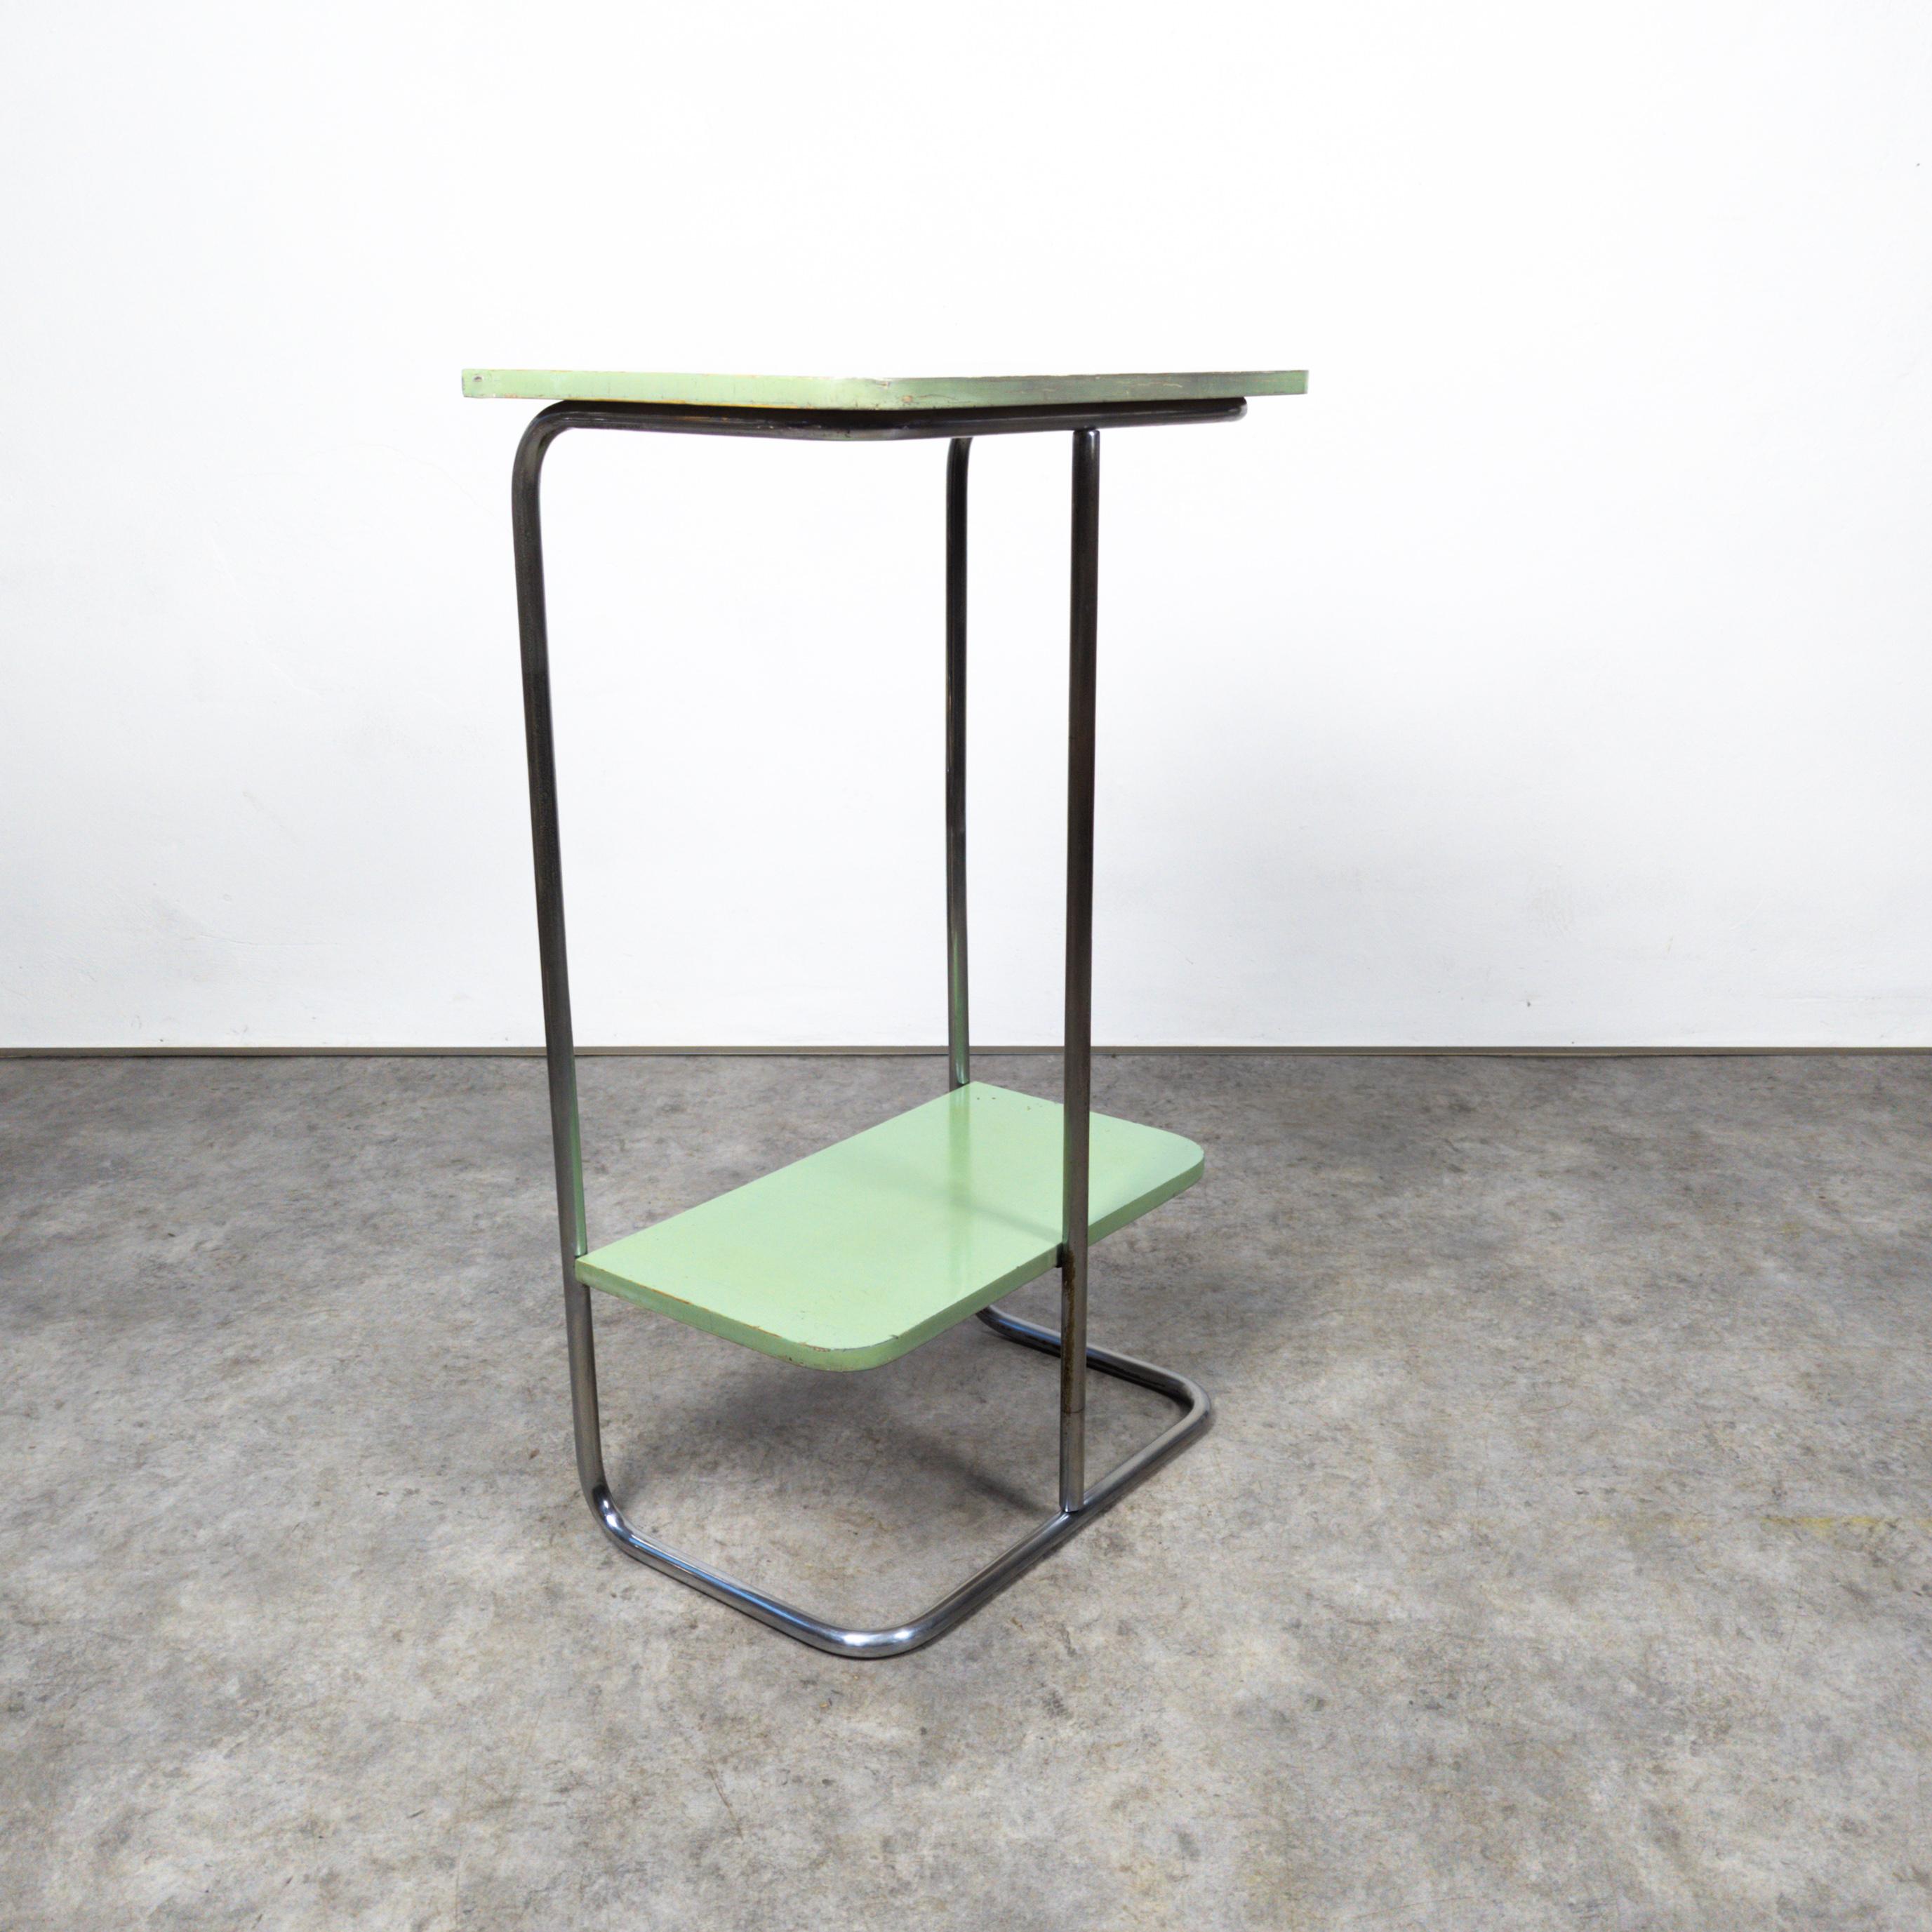 Unique bauhaus style tubular steel console table produced by Slezák, former Czechoslovakia in the 1930s. Made of chrome plated tubular steel and green lacquered beech wood this piece is fine example of Czech functionalism. In very well preserved